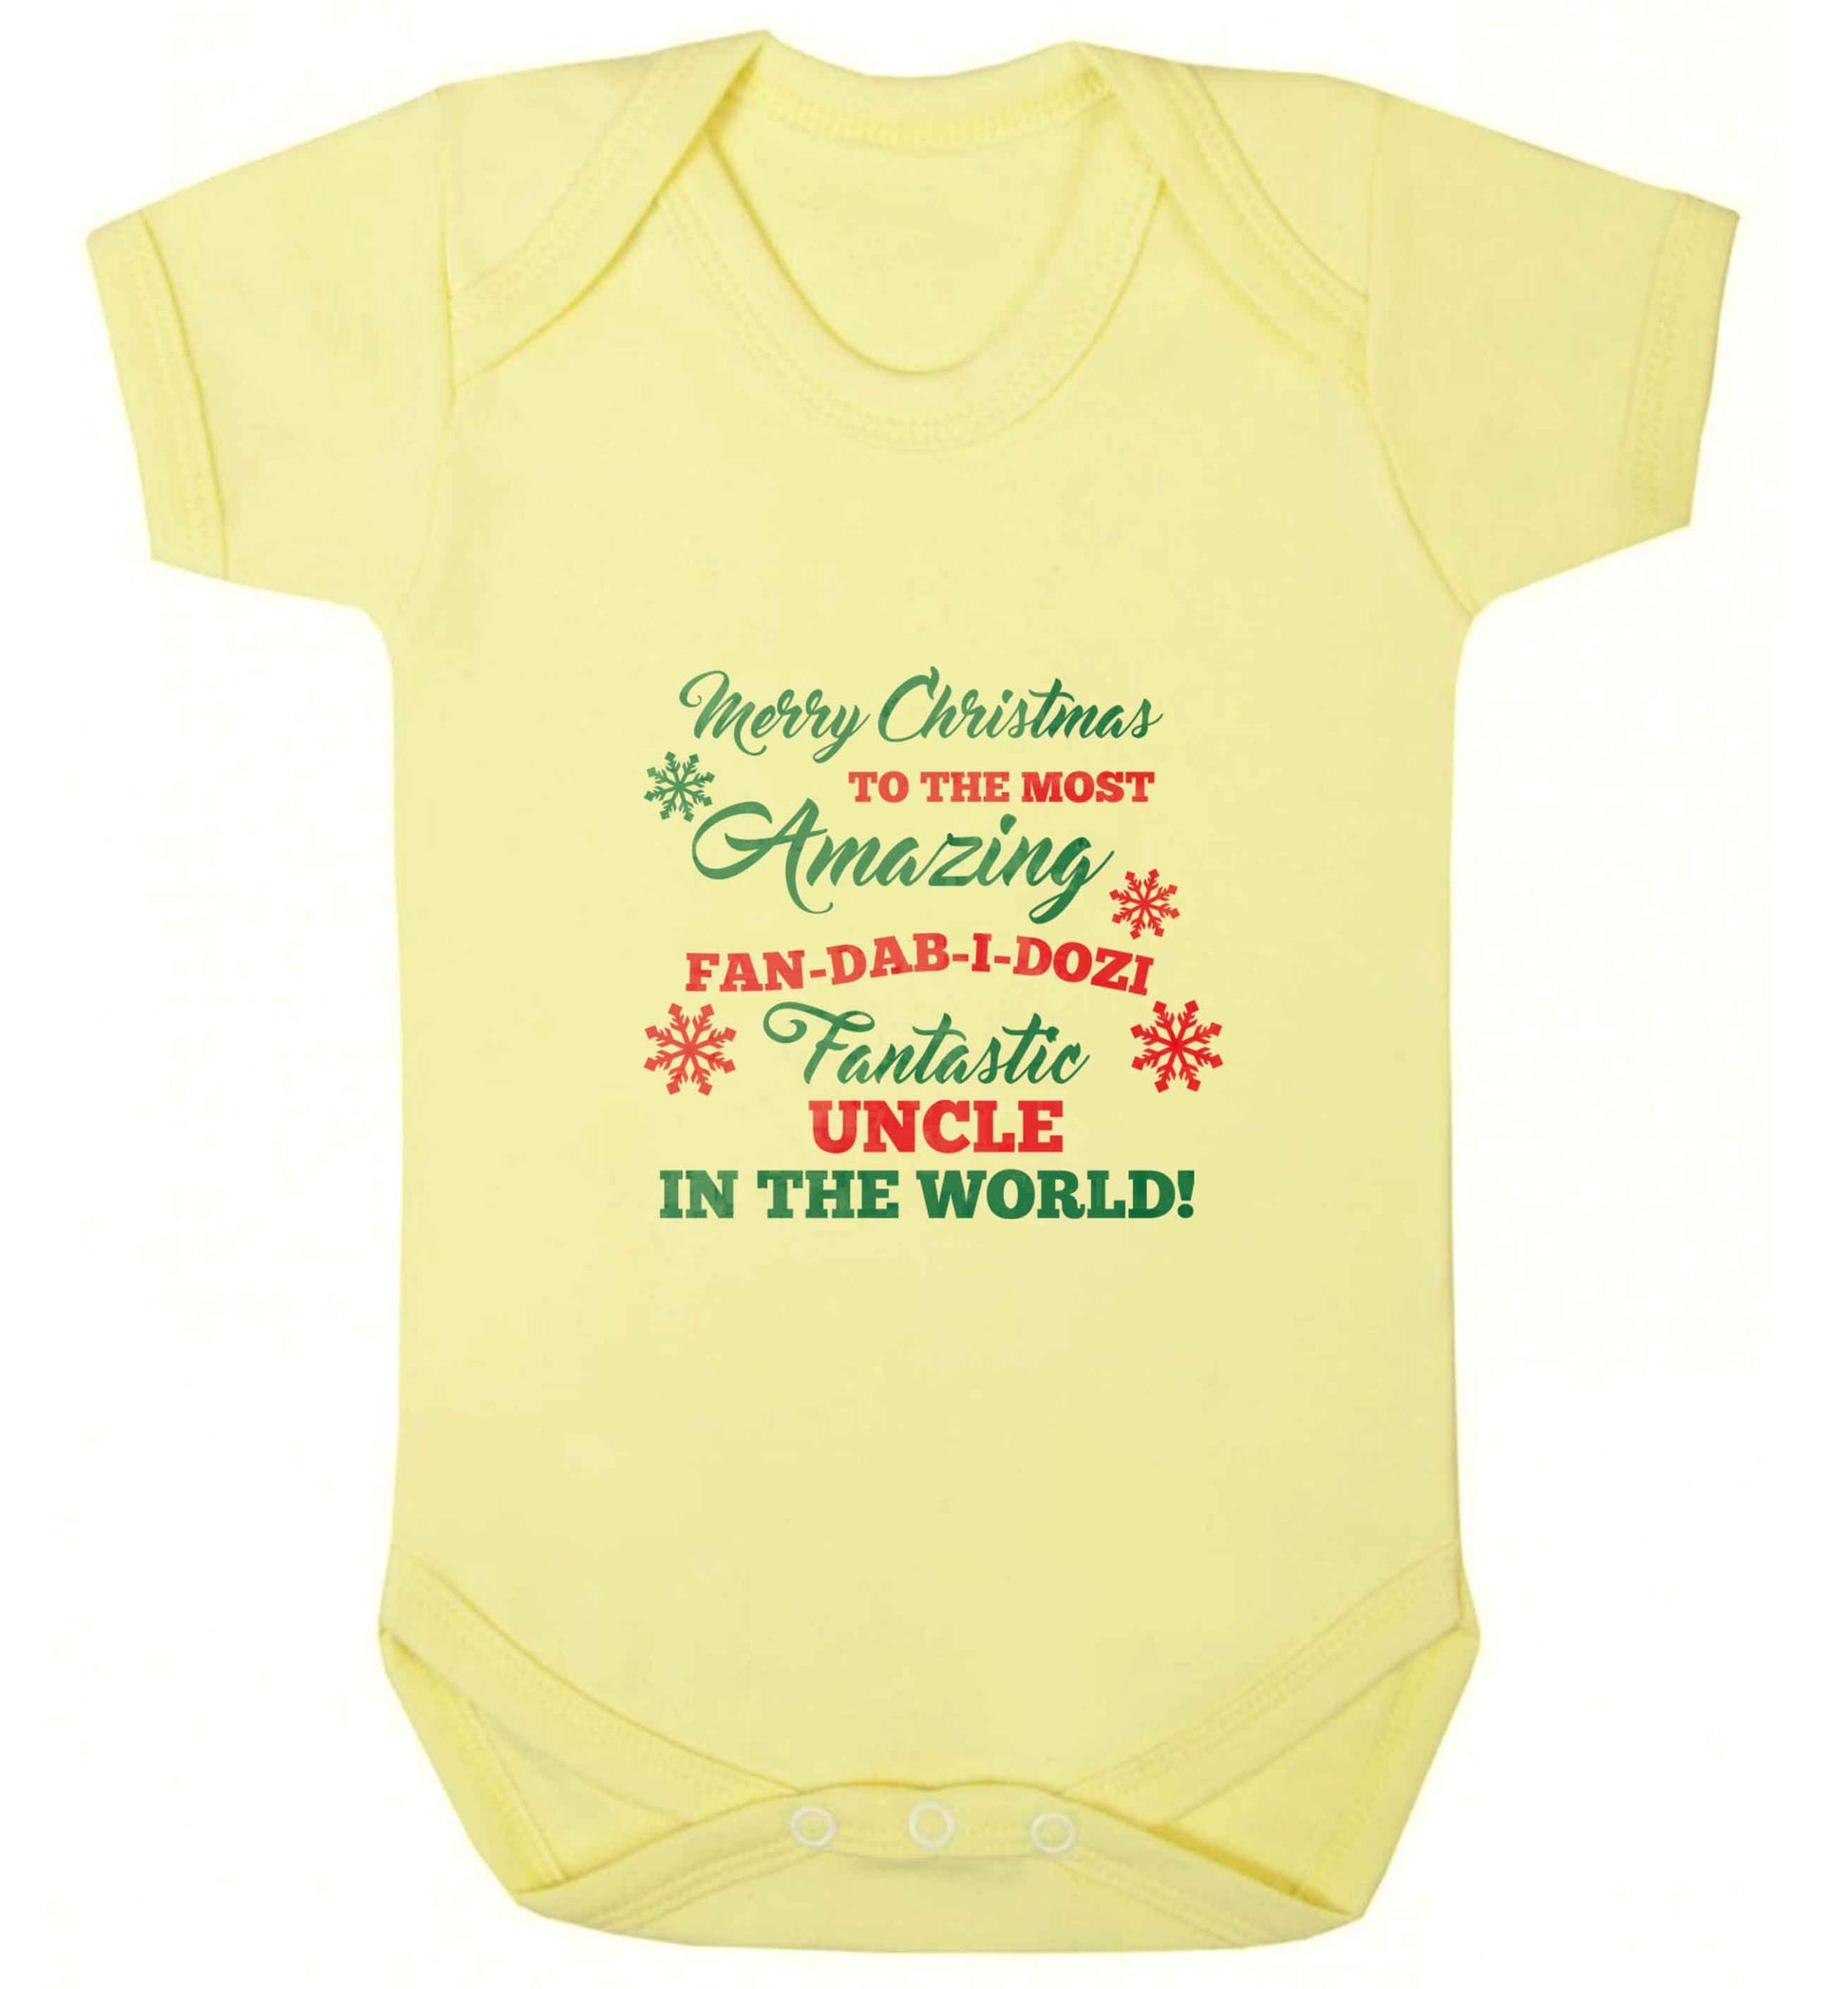 Merry Christmas to the most amazing fan-dab-i-dozi fantasic Uncle in the world baby vest pale yellow 18-24 months